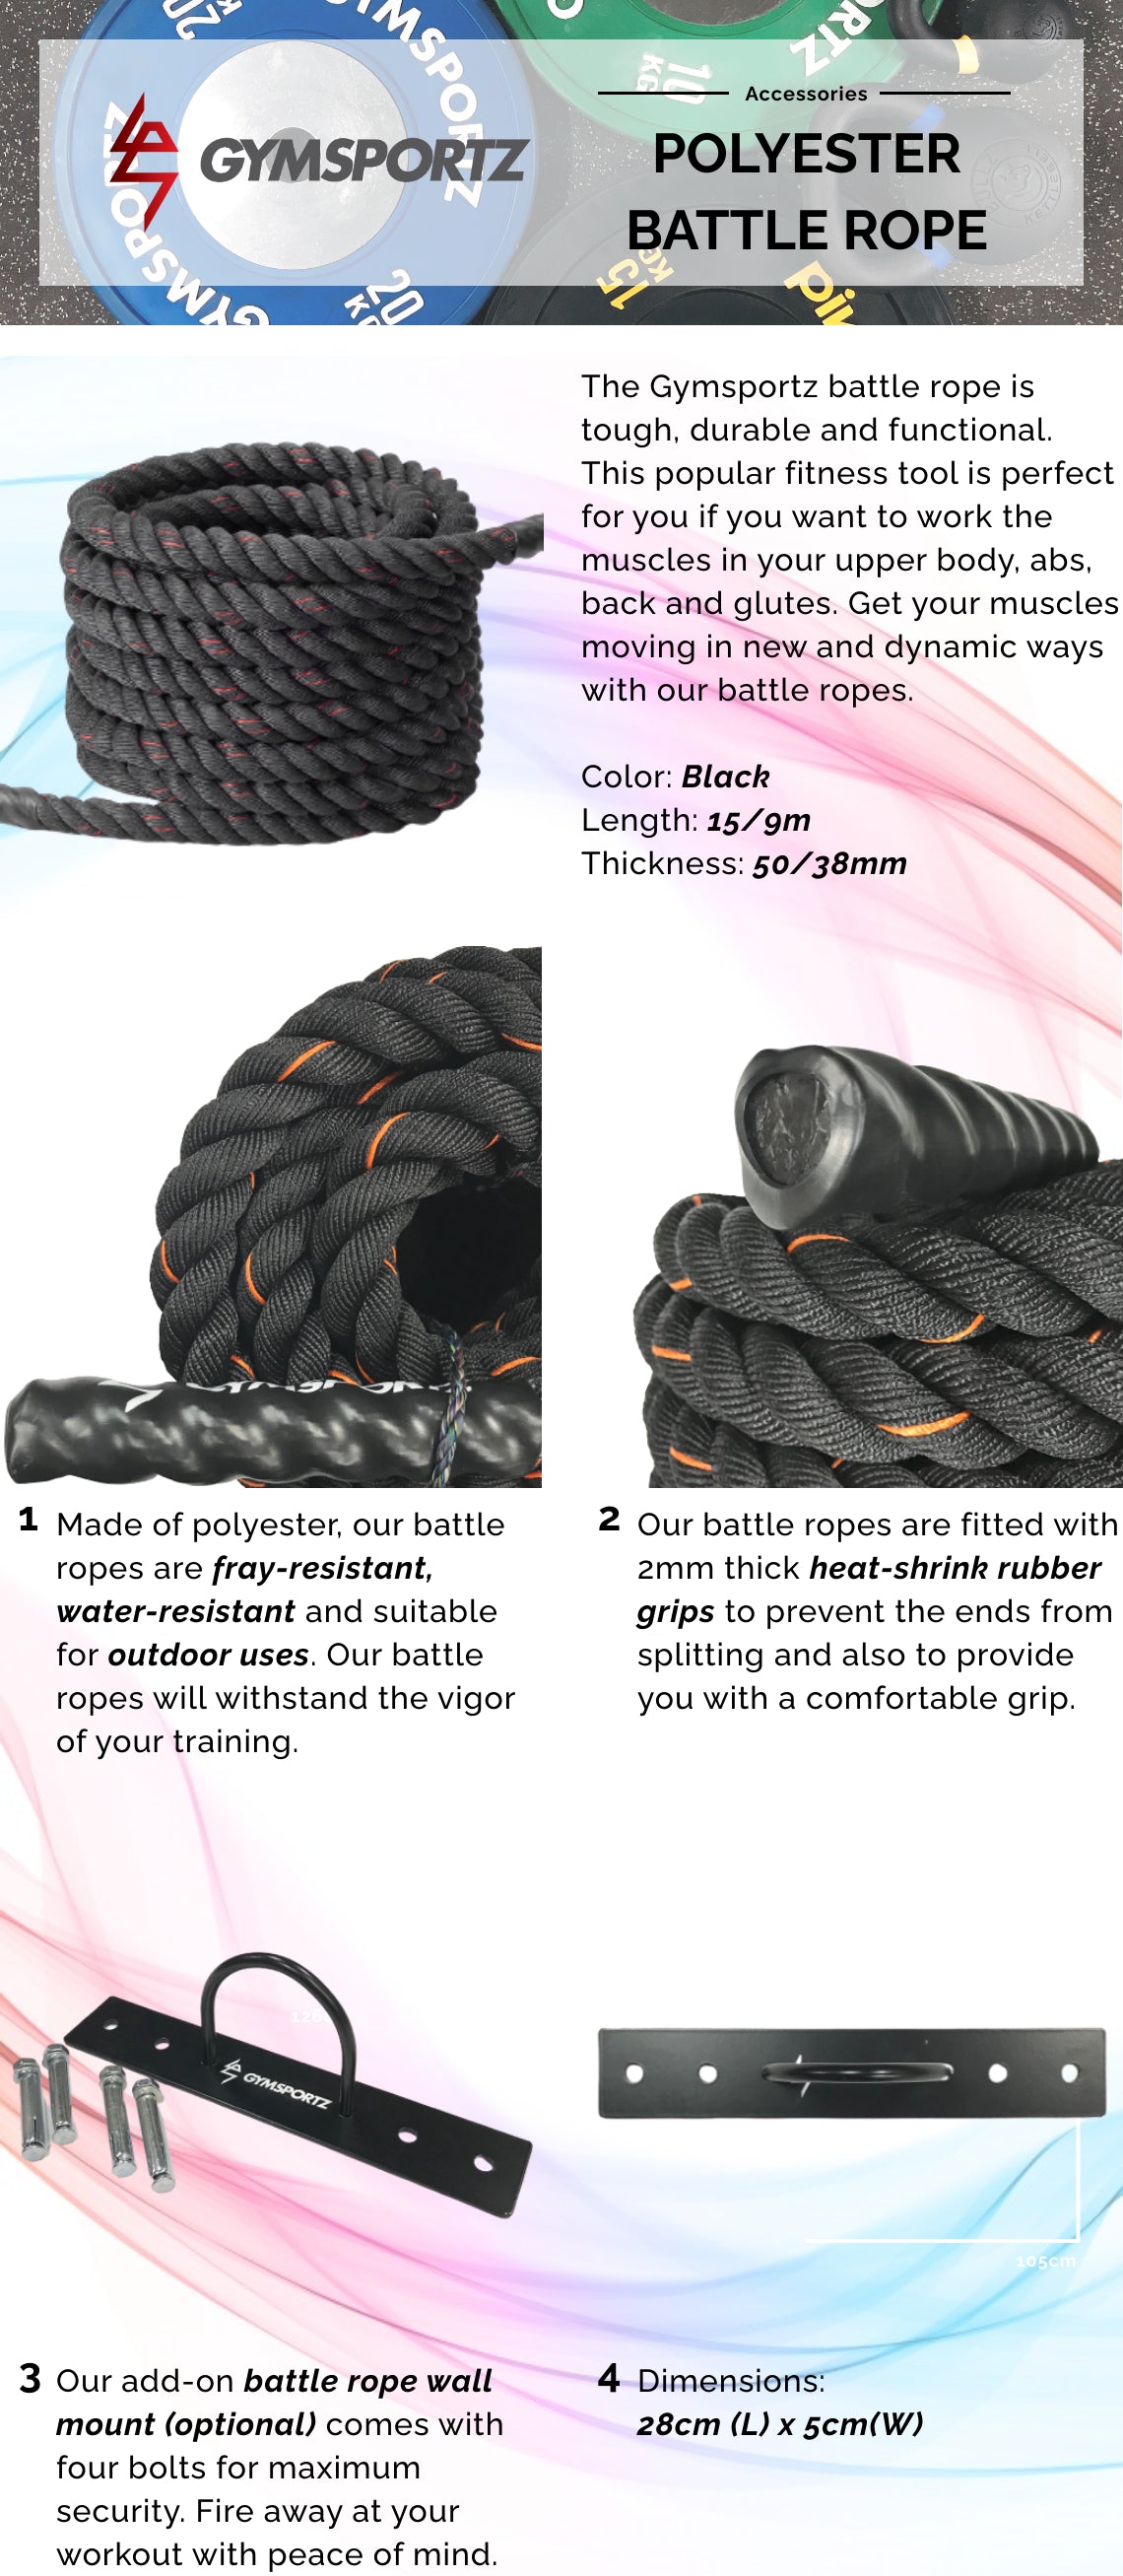 PM215 Polyester Battle Rope